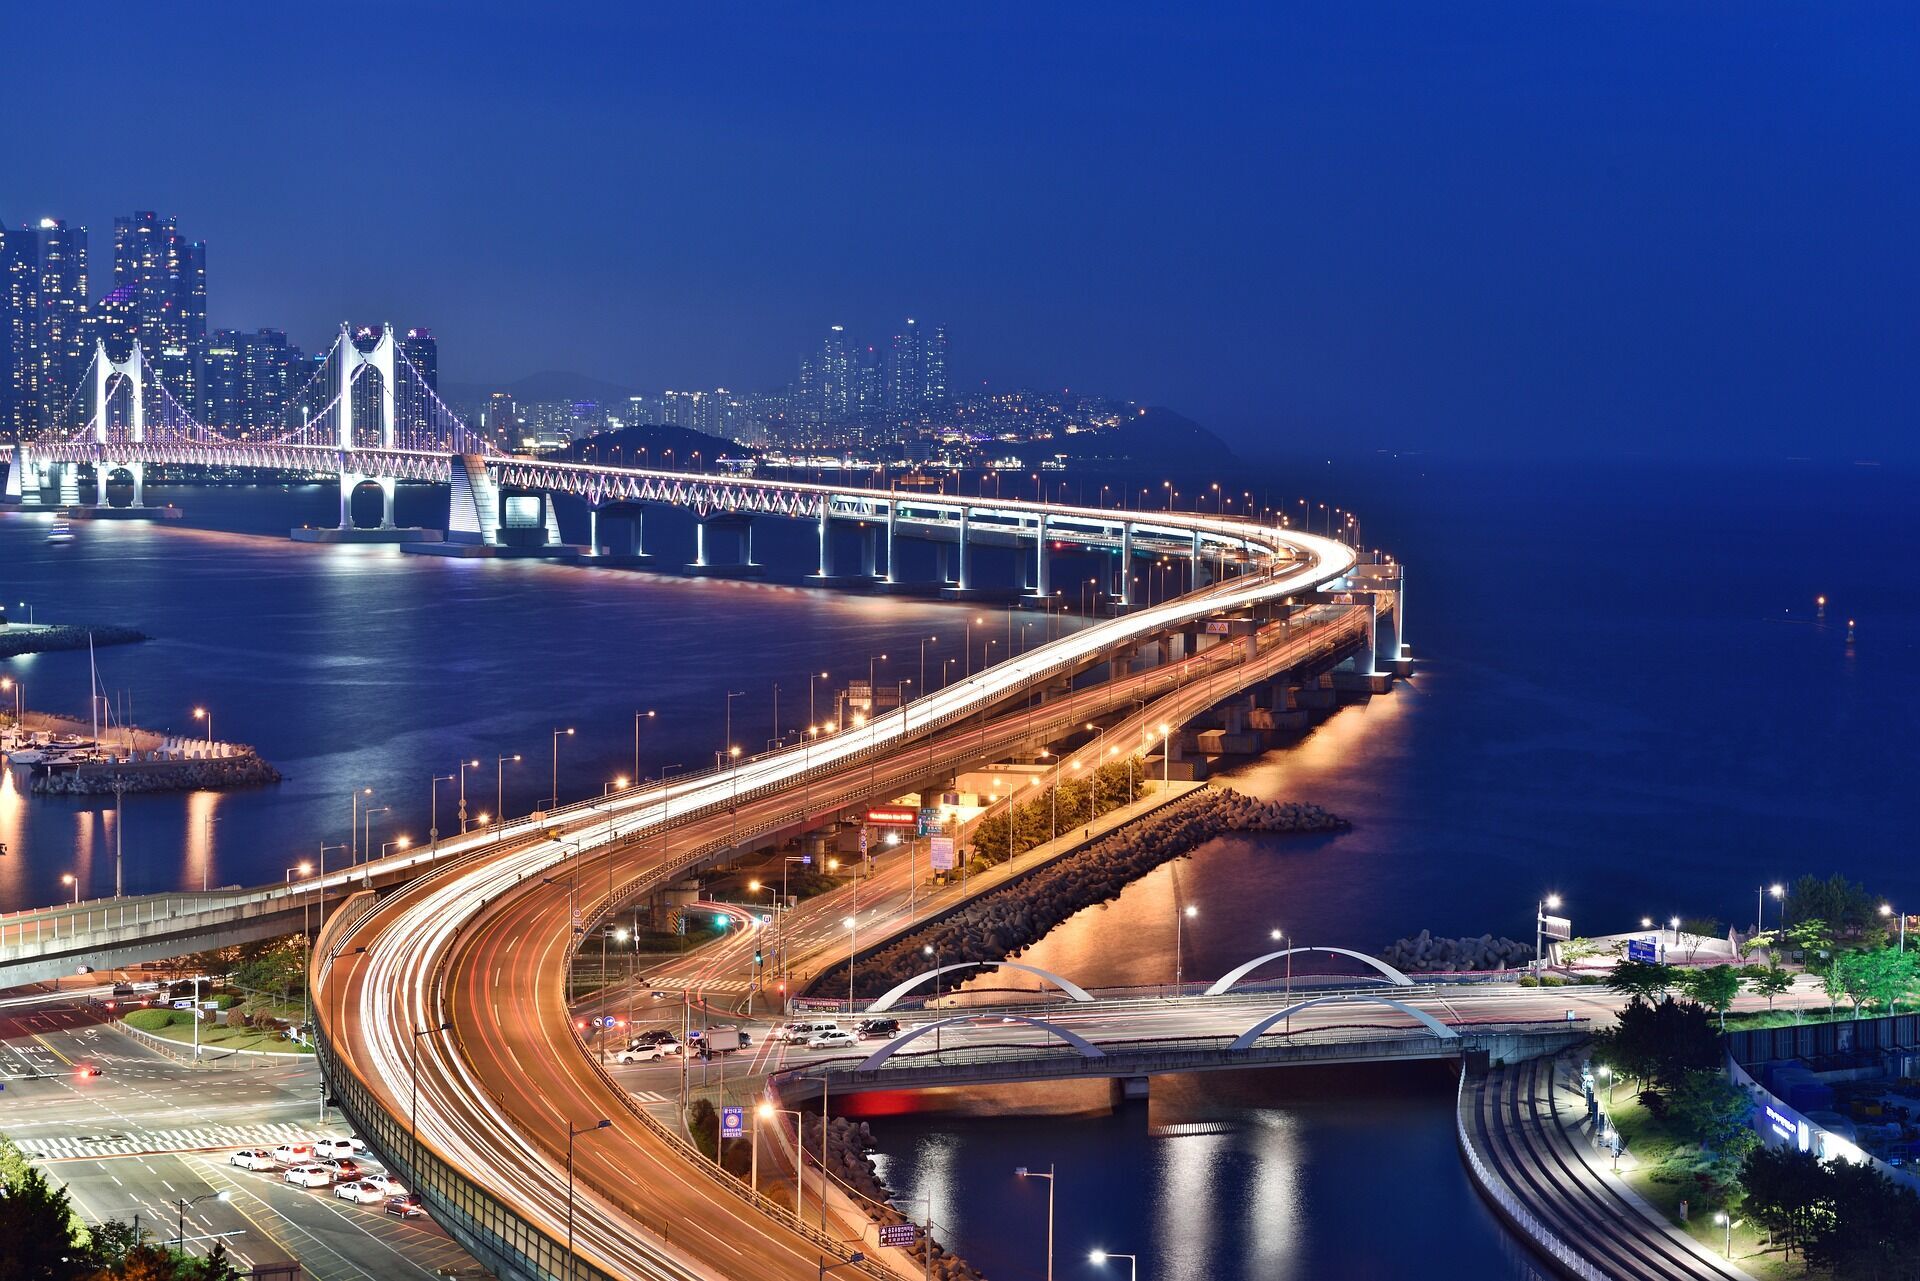 5 most amazing man-made bridges in different regions of the world